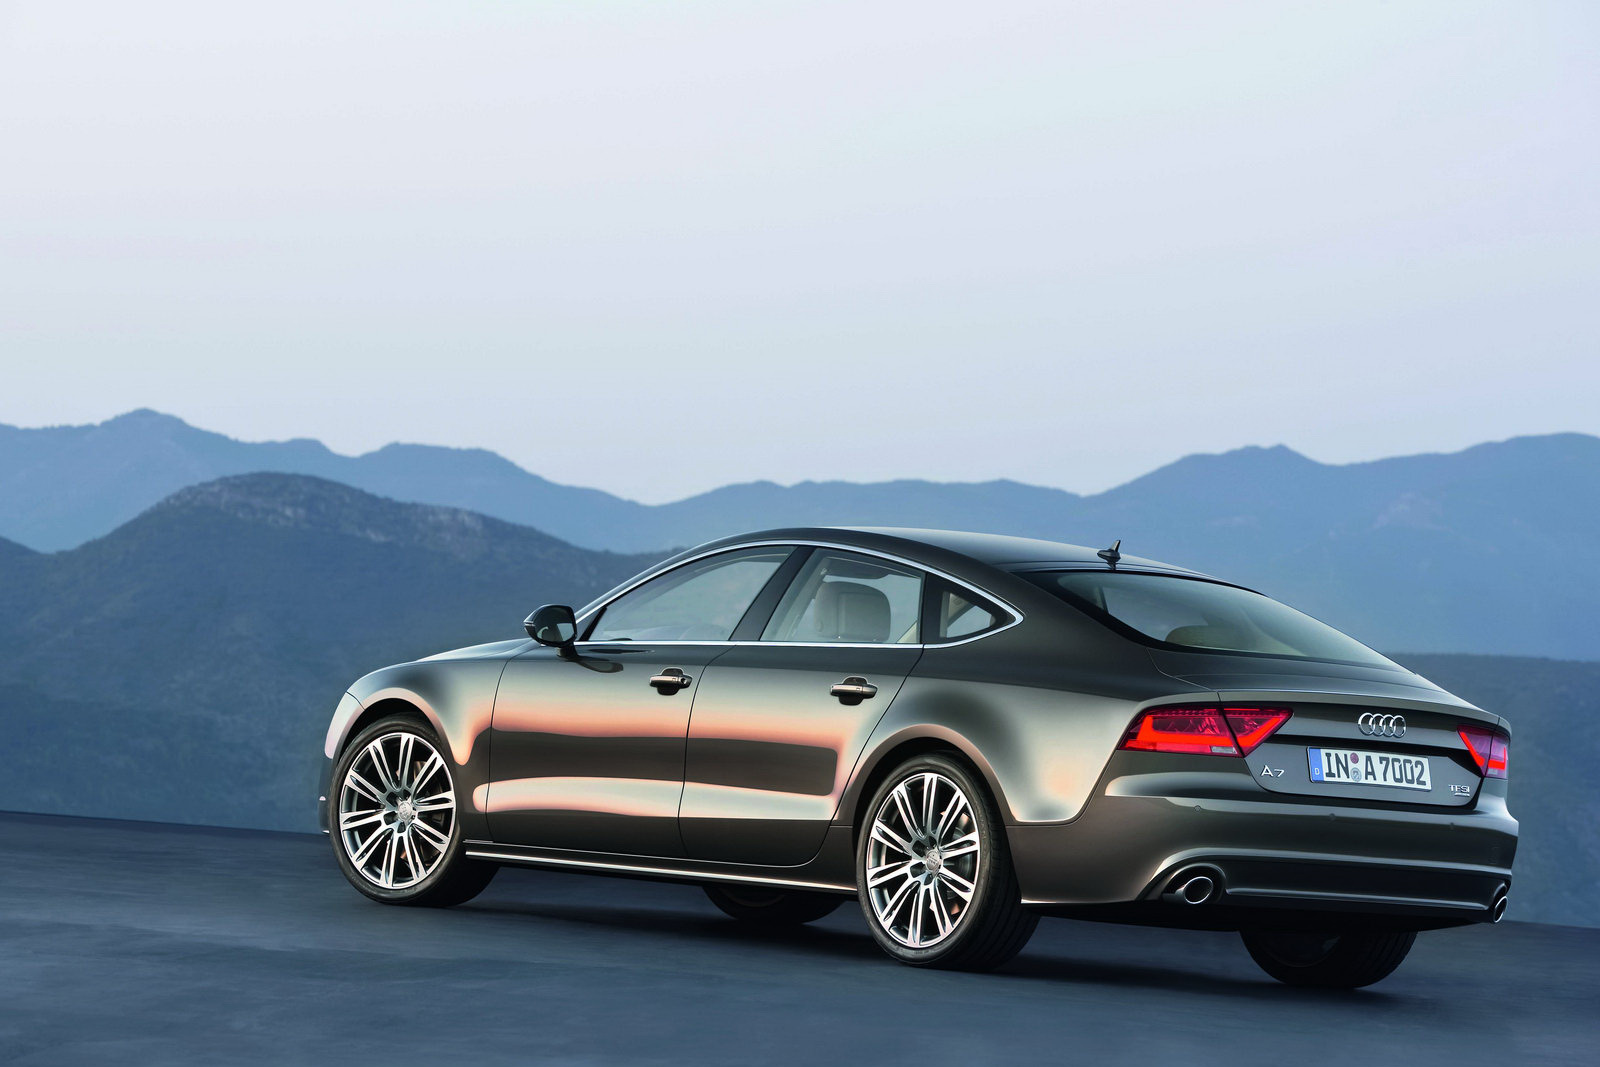 Audi A7 1st (4G8) Generation Exterior Side View